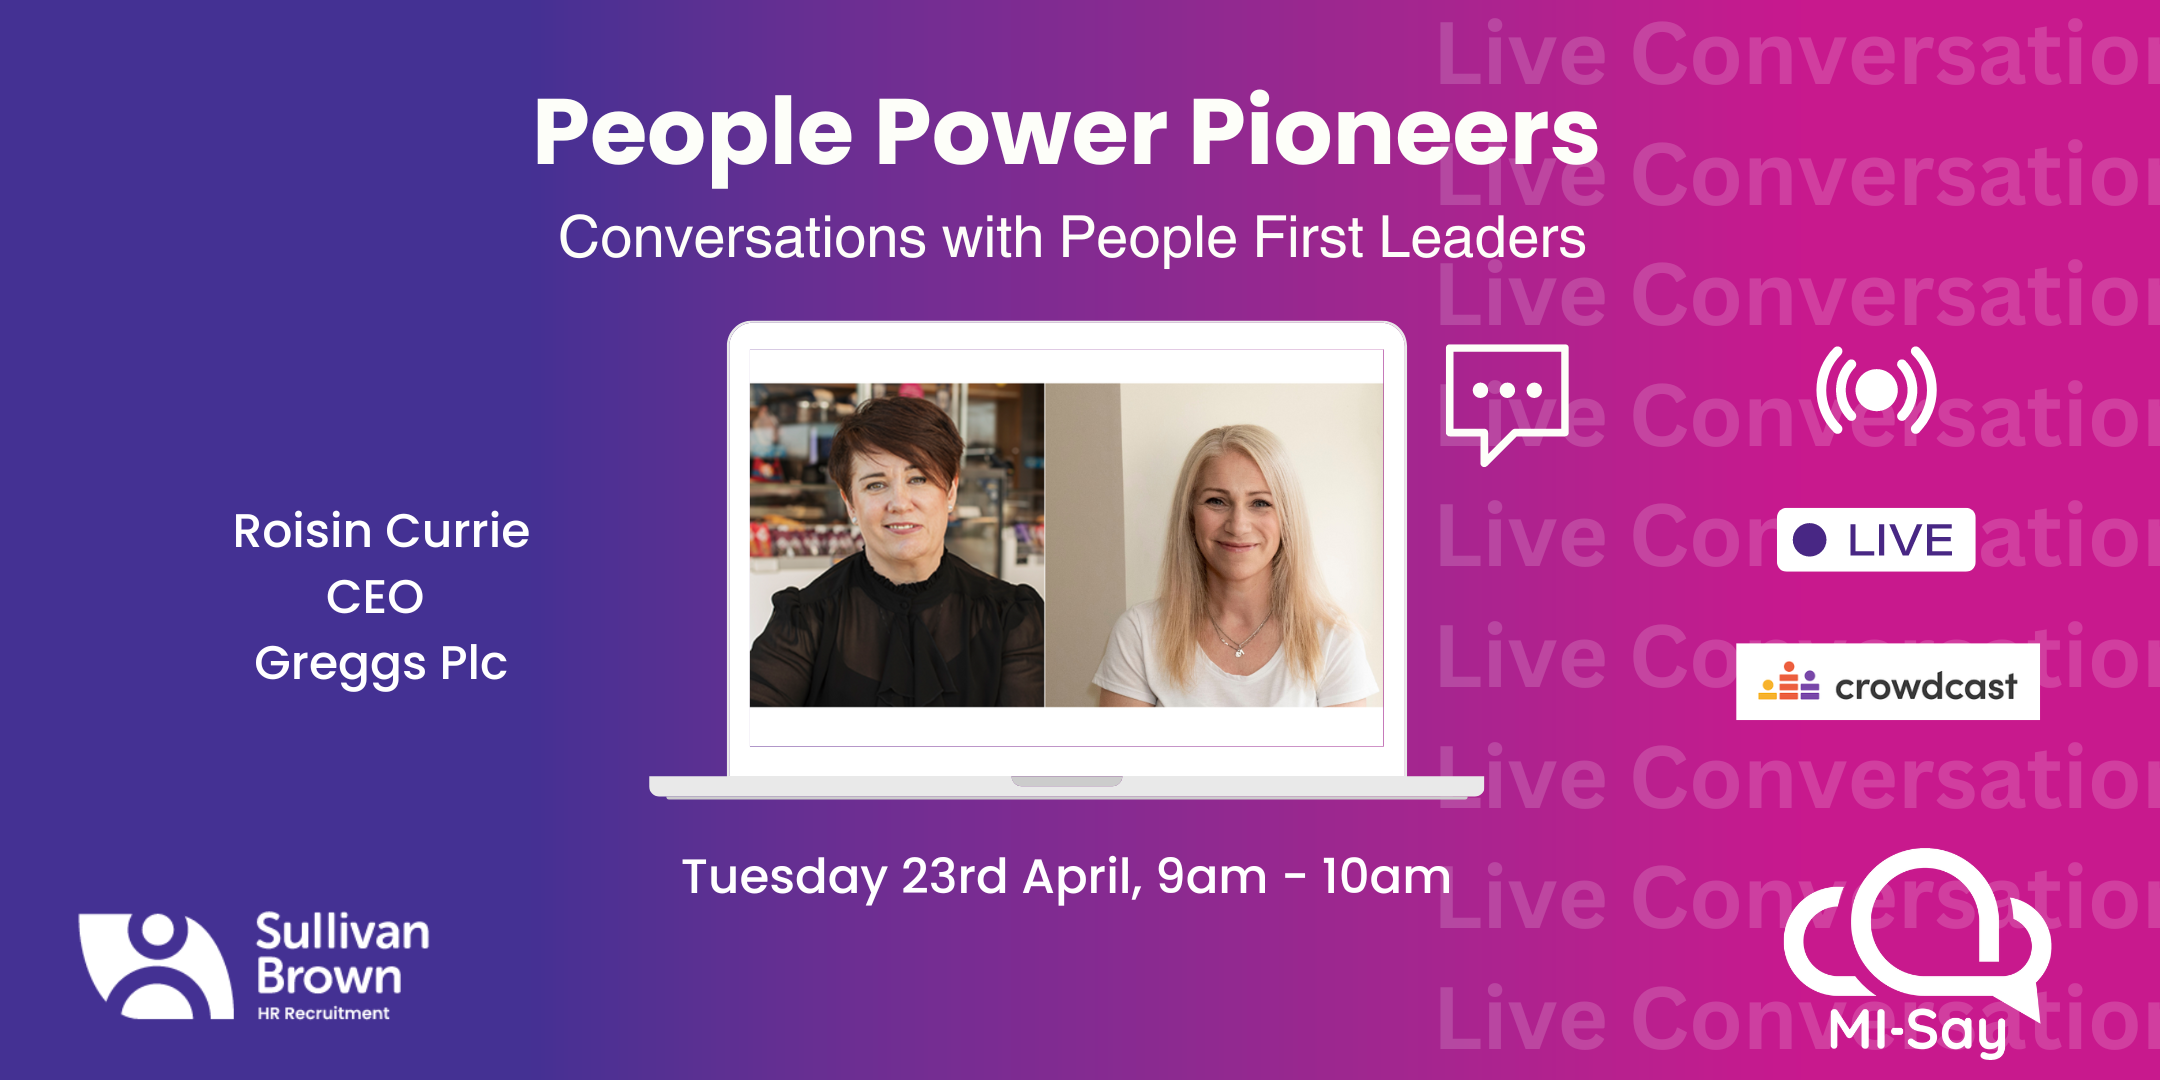 People Power Pioneers event cover photo